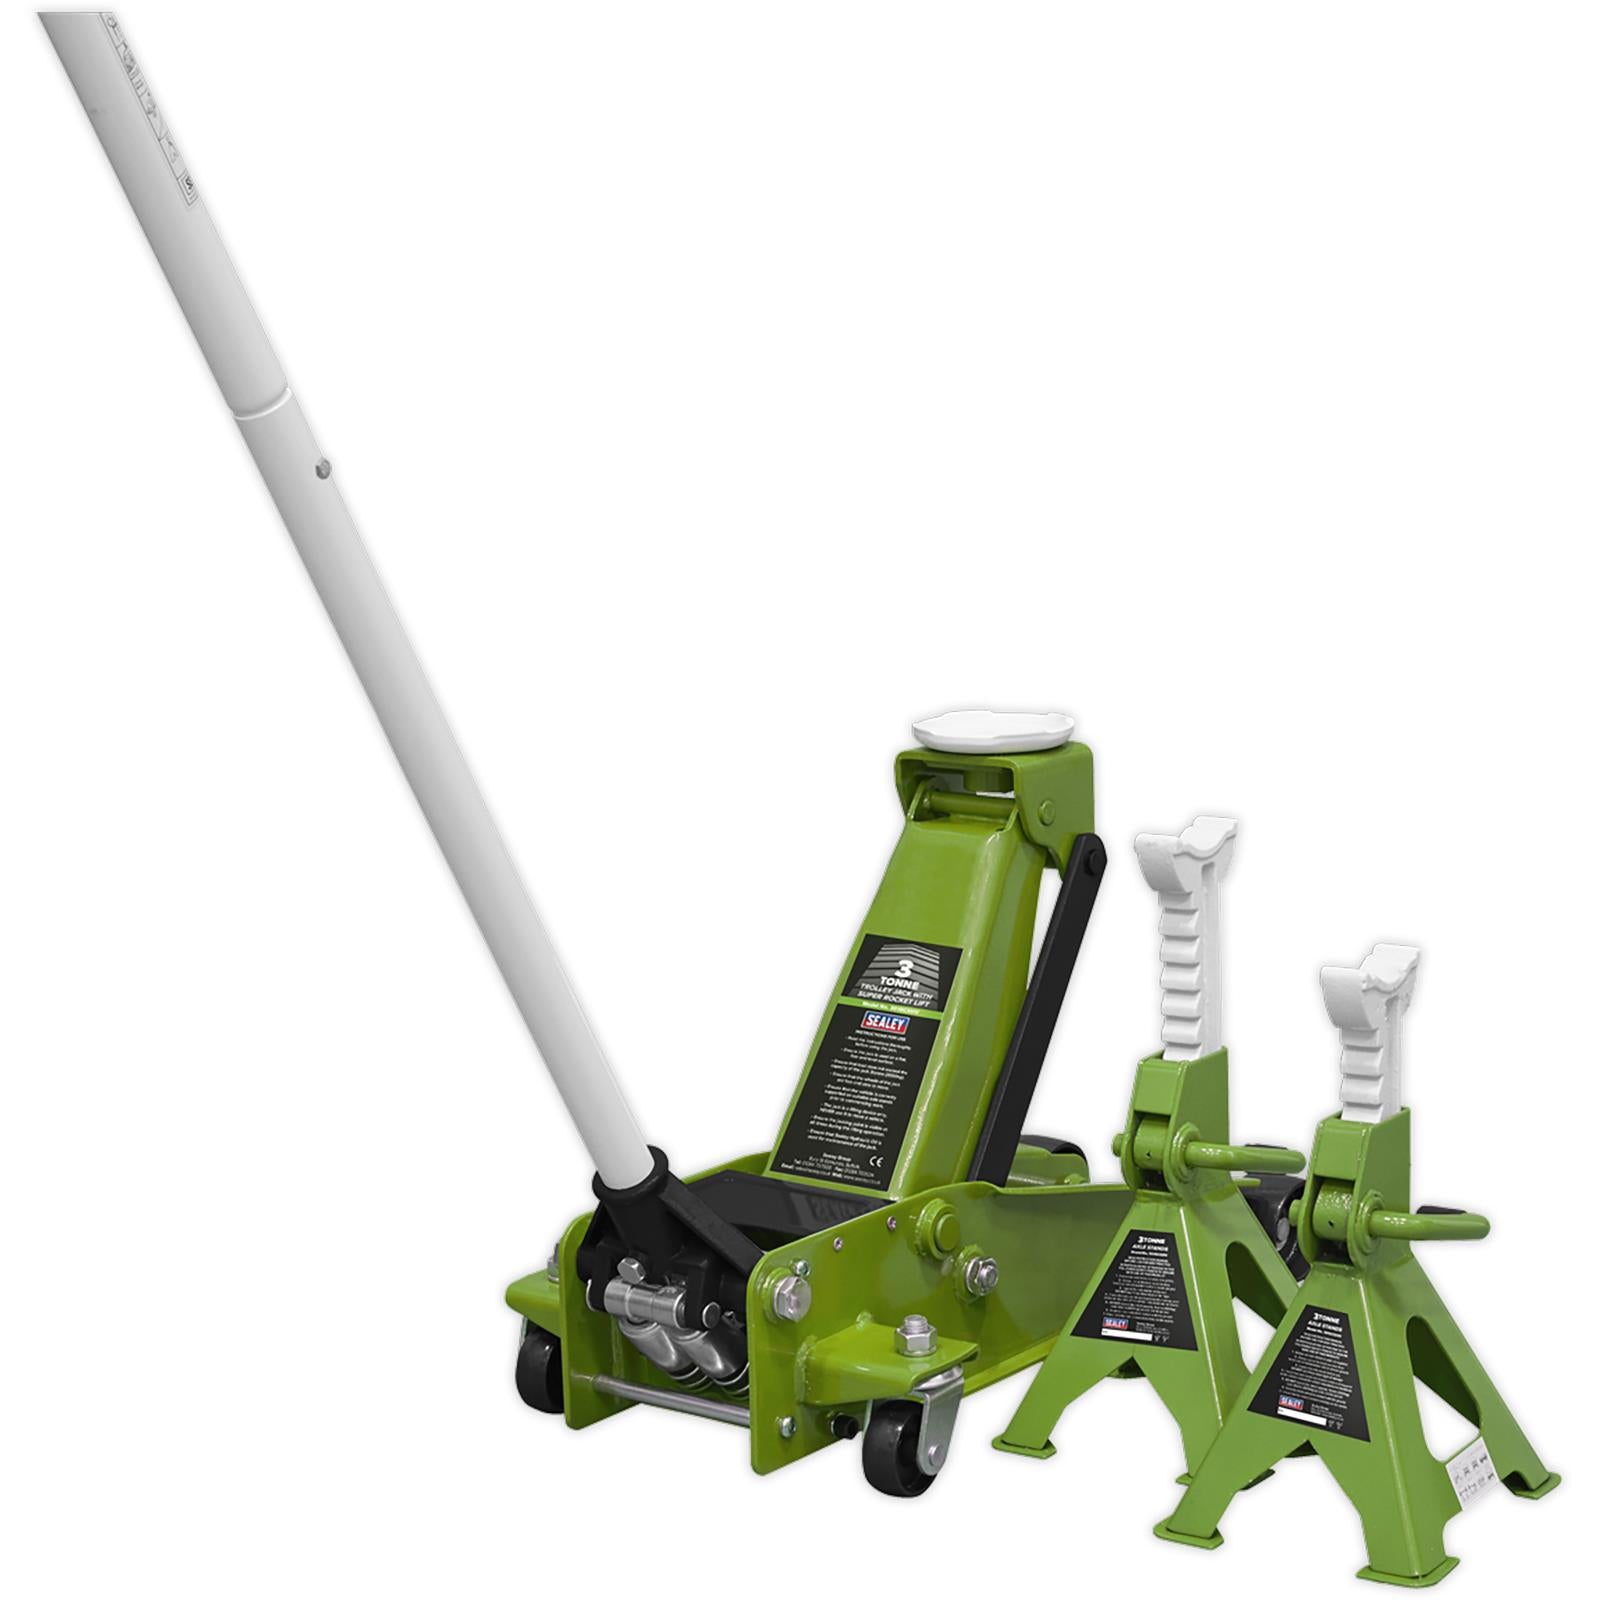 Sealey Trolley Jack 3 Tonne with Super Rocket Lift & Axle Stands (Pair) 3 Tonne Capacity per Stand-Hi-Vis